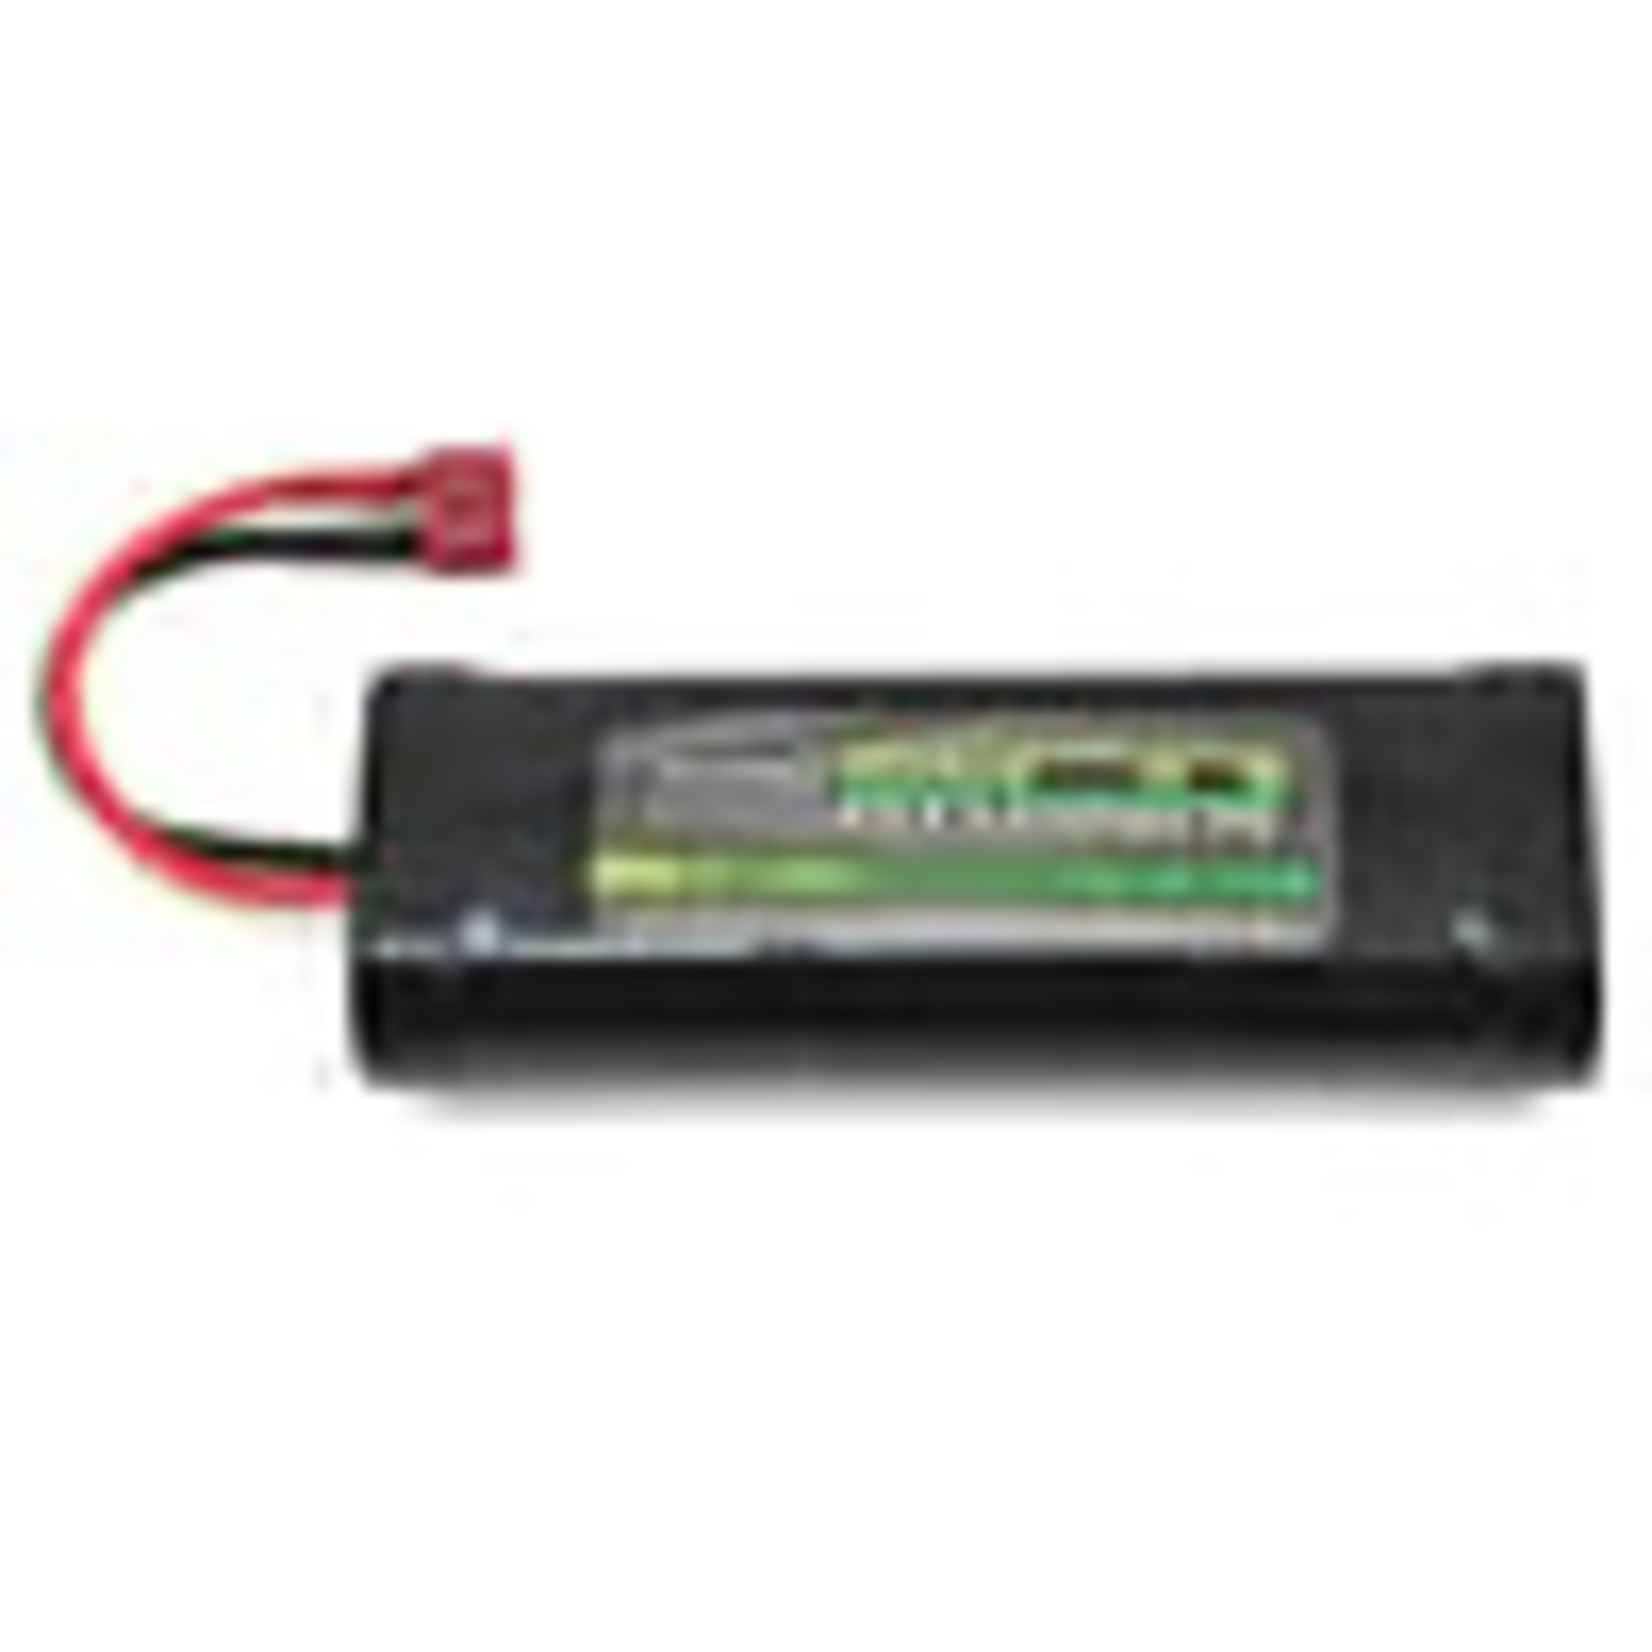 EcoPower ECP-5013   6-Cell NiMH Stick Pack Battery w/T-Style Connector (7.2V/2000mAh)